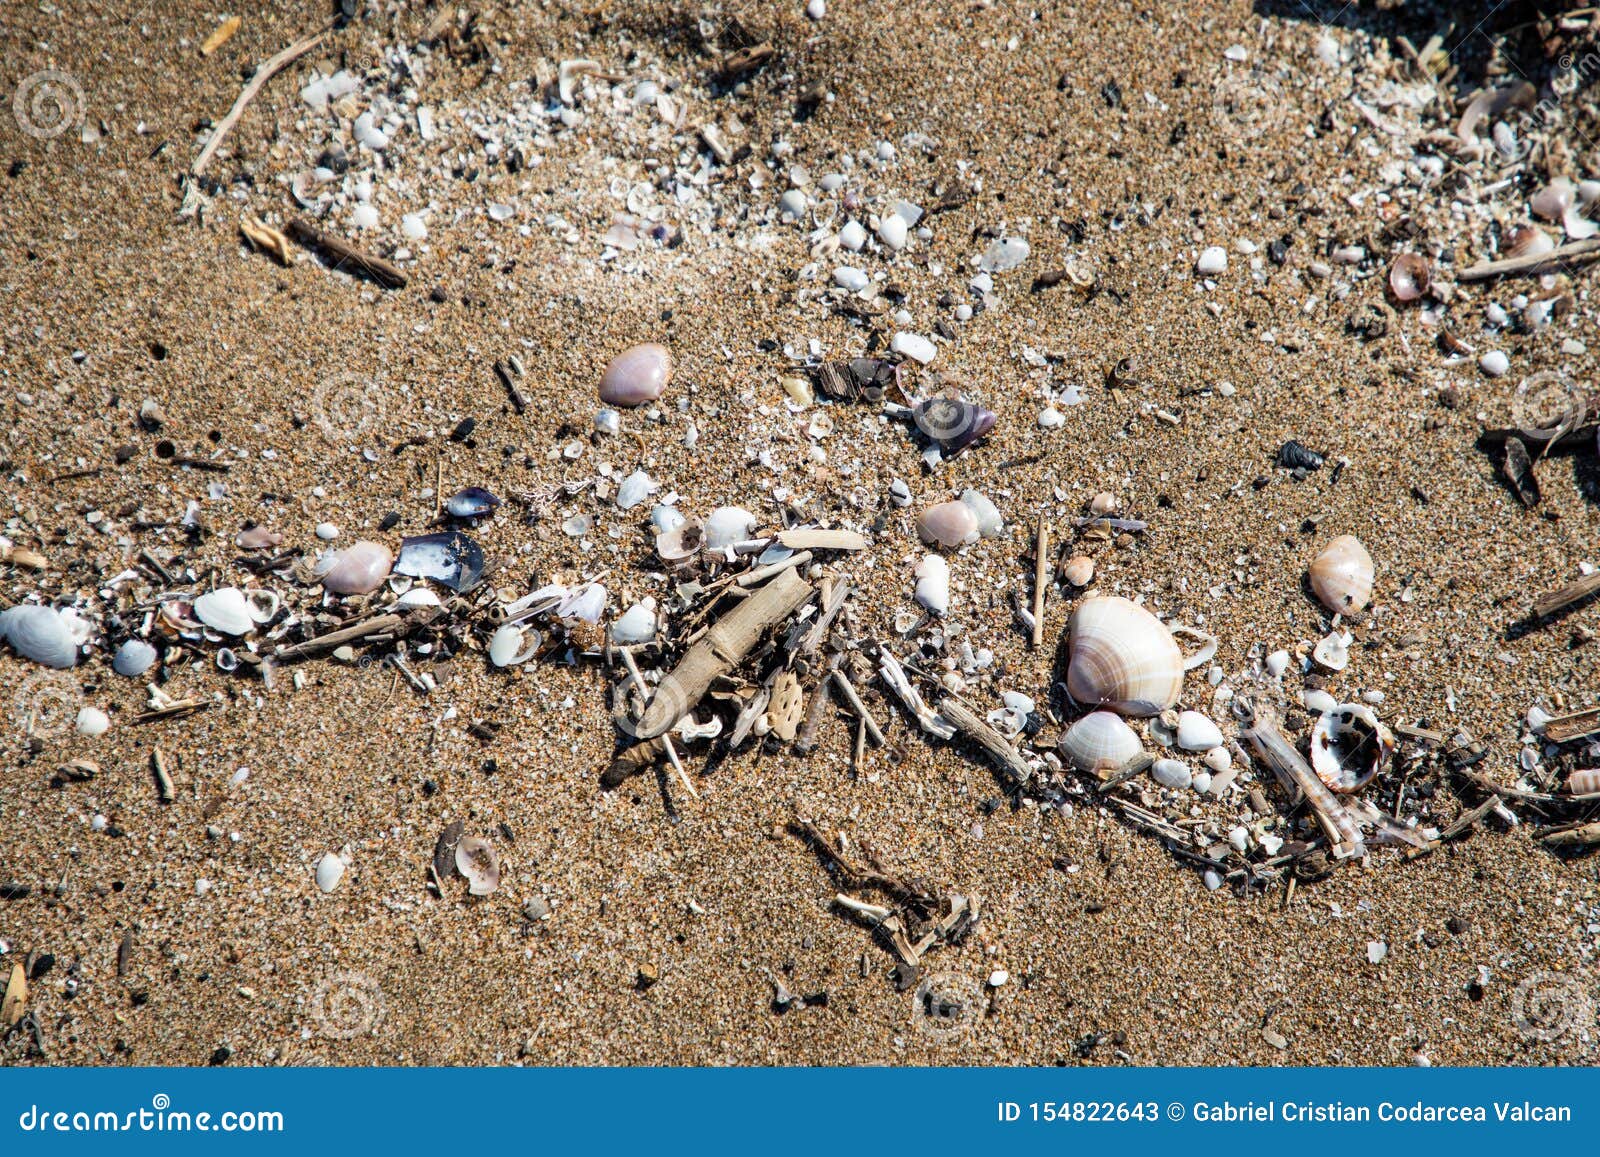 close up view of shells in the sand